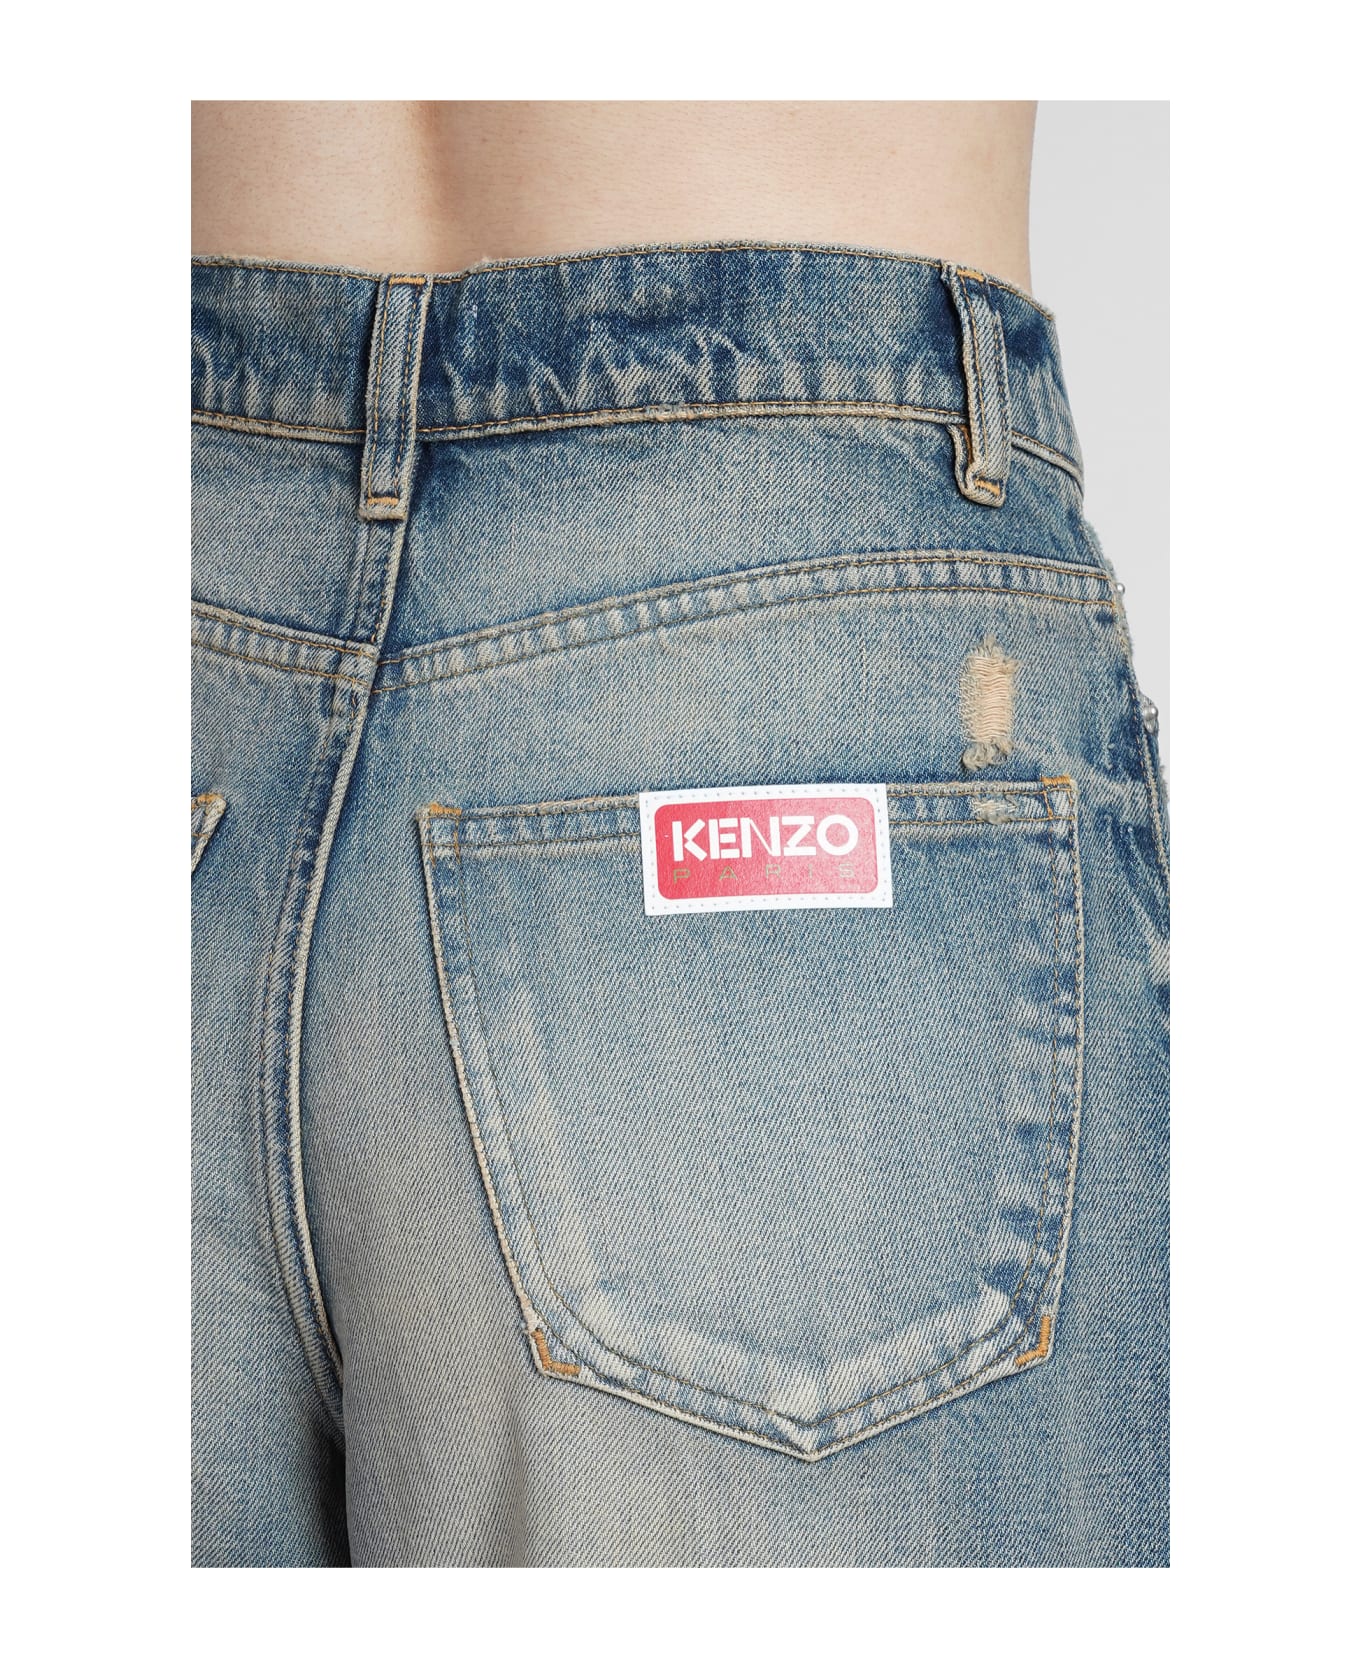 Kenzo Jeans In Blue Cotton - blue デニム